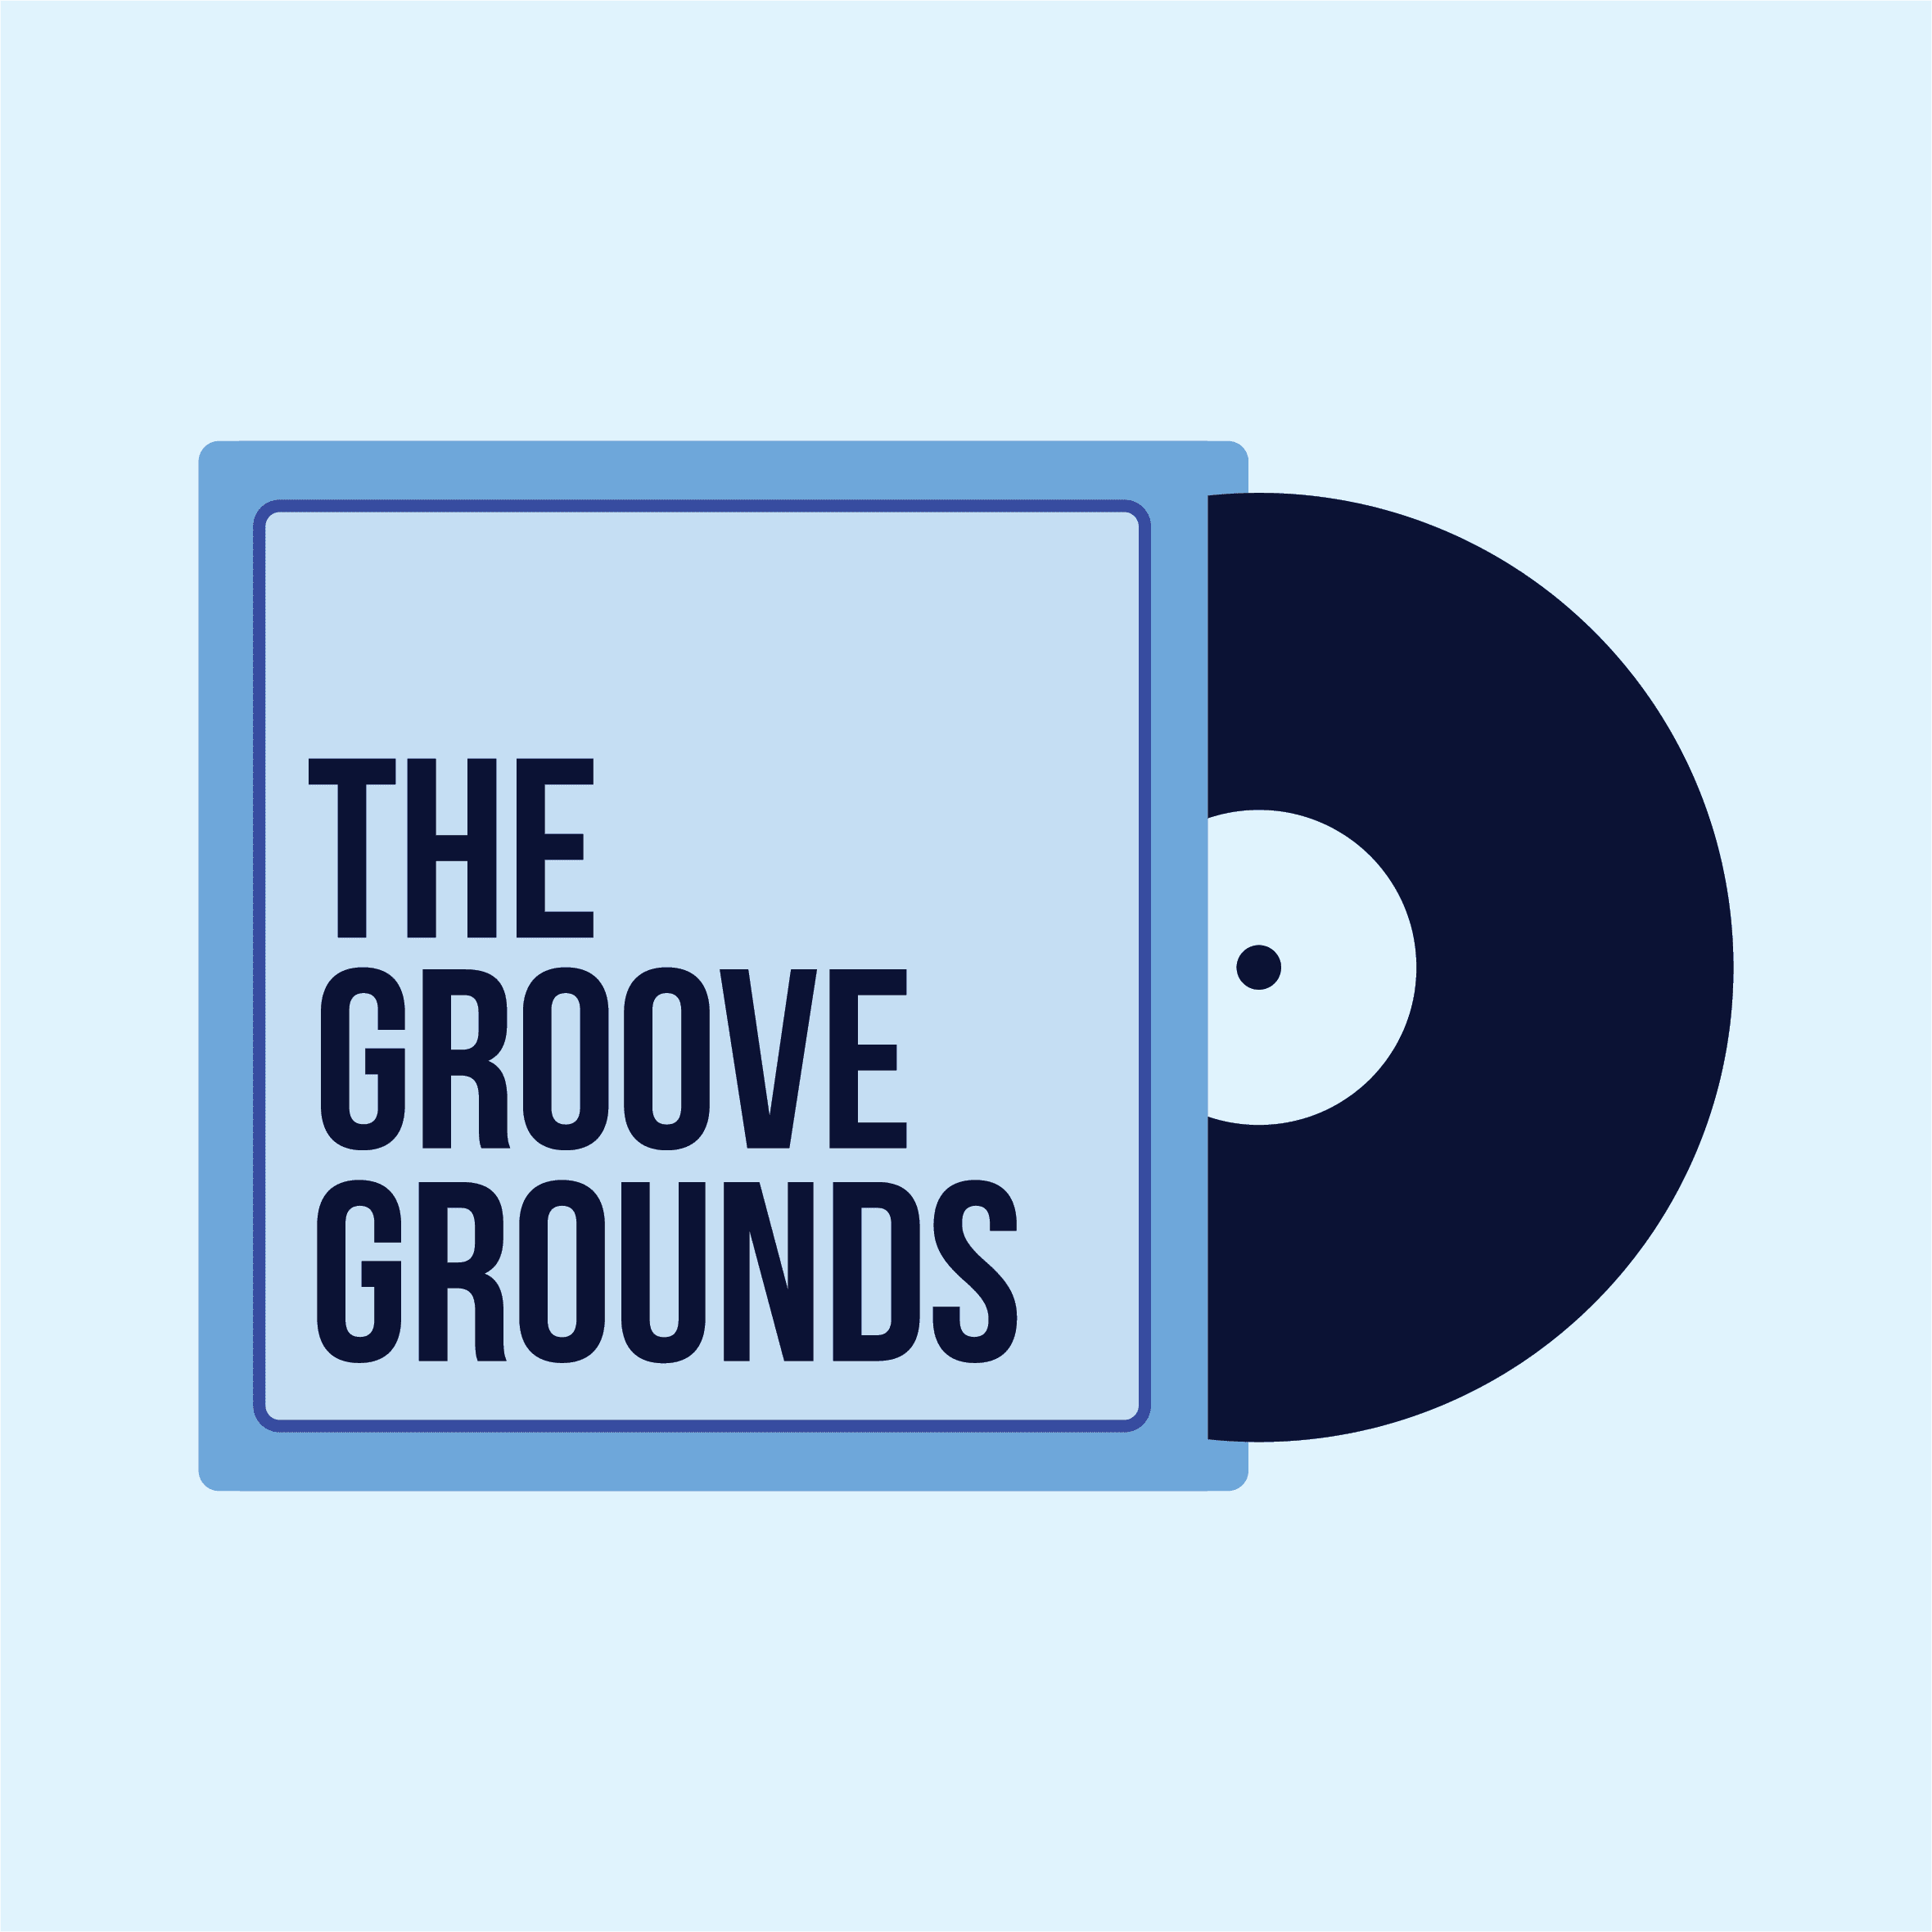 The Groove Grounds logo. A dark purple vinyl record pulled about halfway out of the cover. The cover says "THE GROOVE GROUNDS" in the same dark purple color.